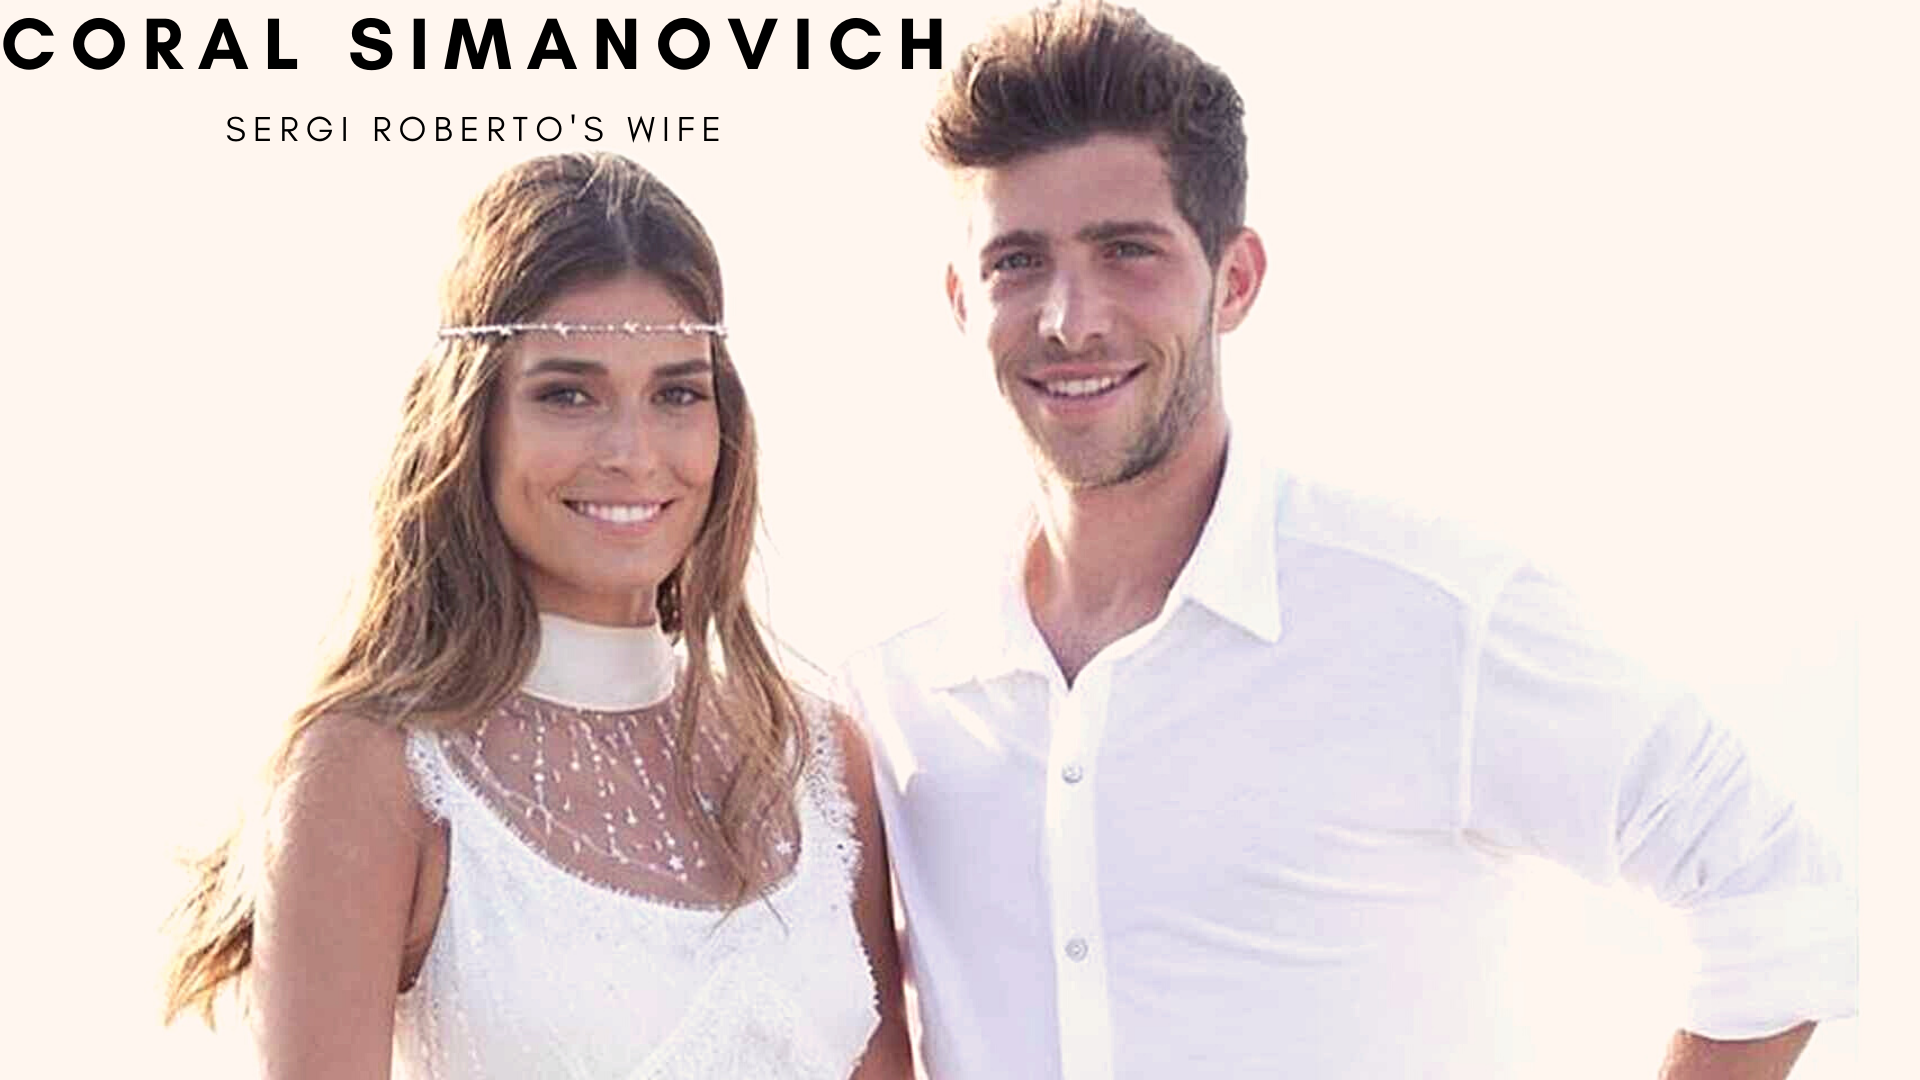 Sergi Roberto with wife Coral Simanovich. (Picture was taken from elespanol.com)